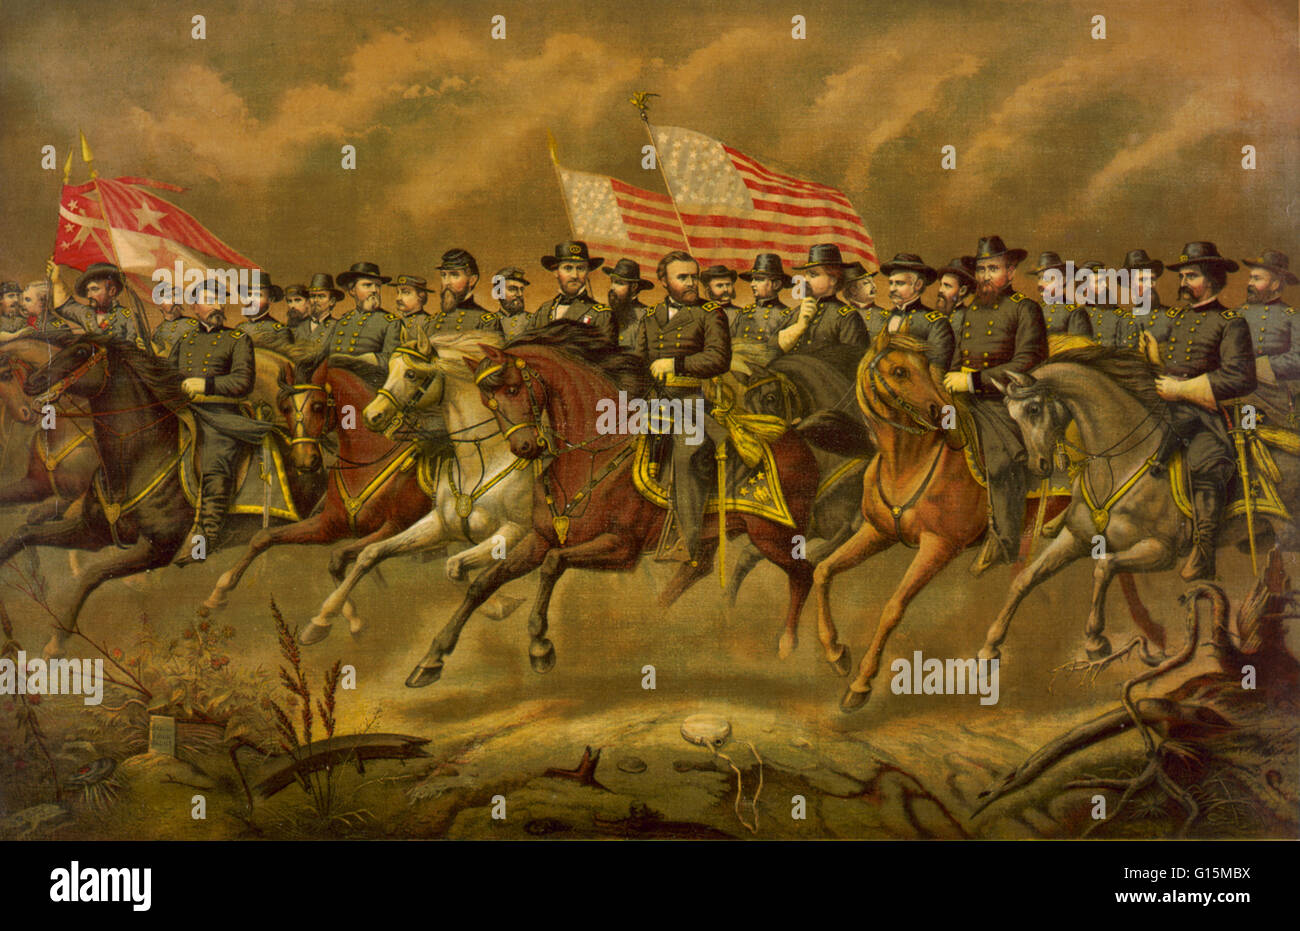 Chromolithograph shows Grant and his Generals on horseback. Ulysses S. Grant (born Hiram Ulysses Grant; April 27, 1822 - July 23, 1885) was the 18th President of the United States. A career soldier, he graduated from the United States Military Academy at Stock Photo